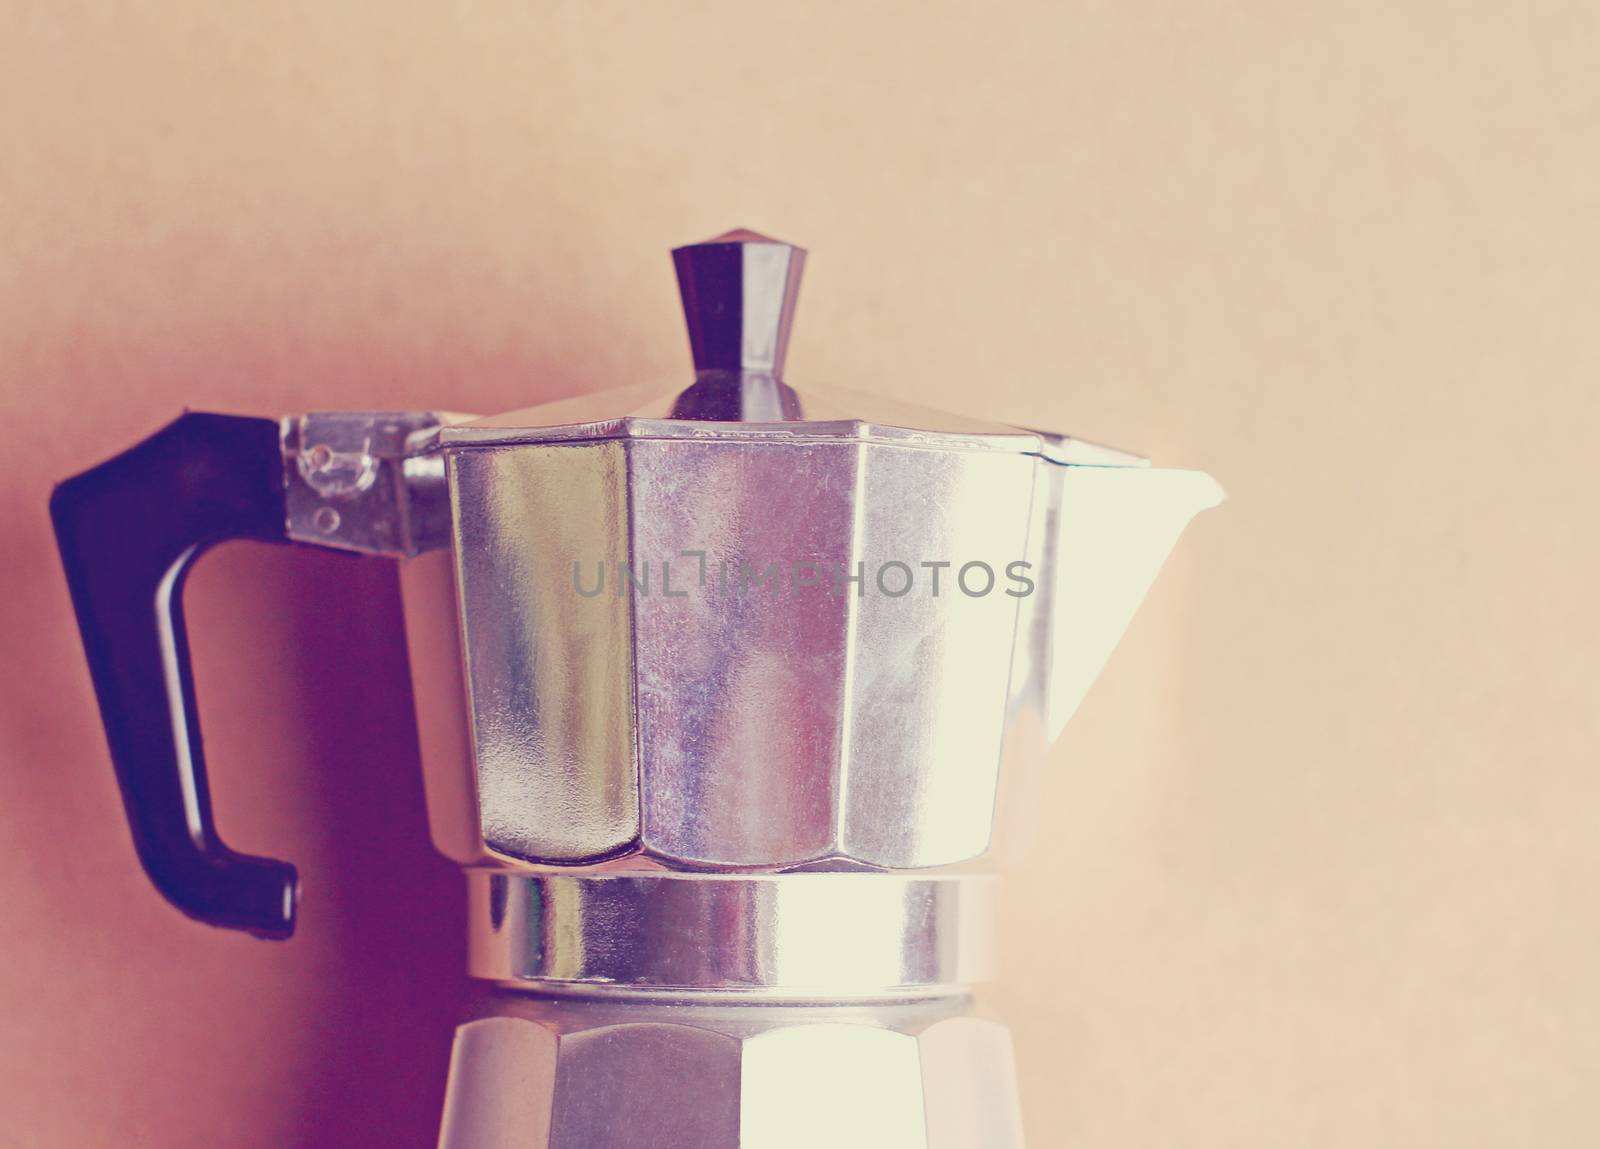 Italian coffee maker with retro filter effect by nuchylee